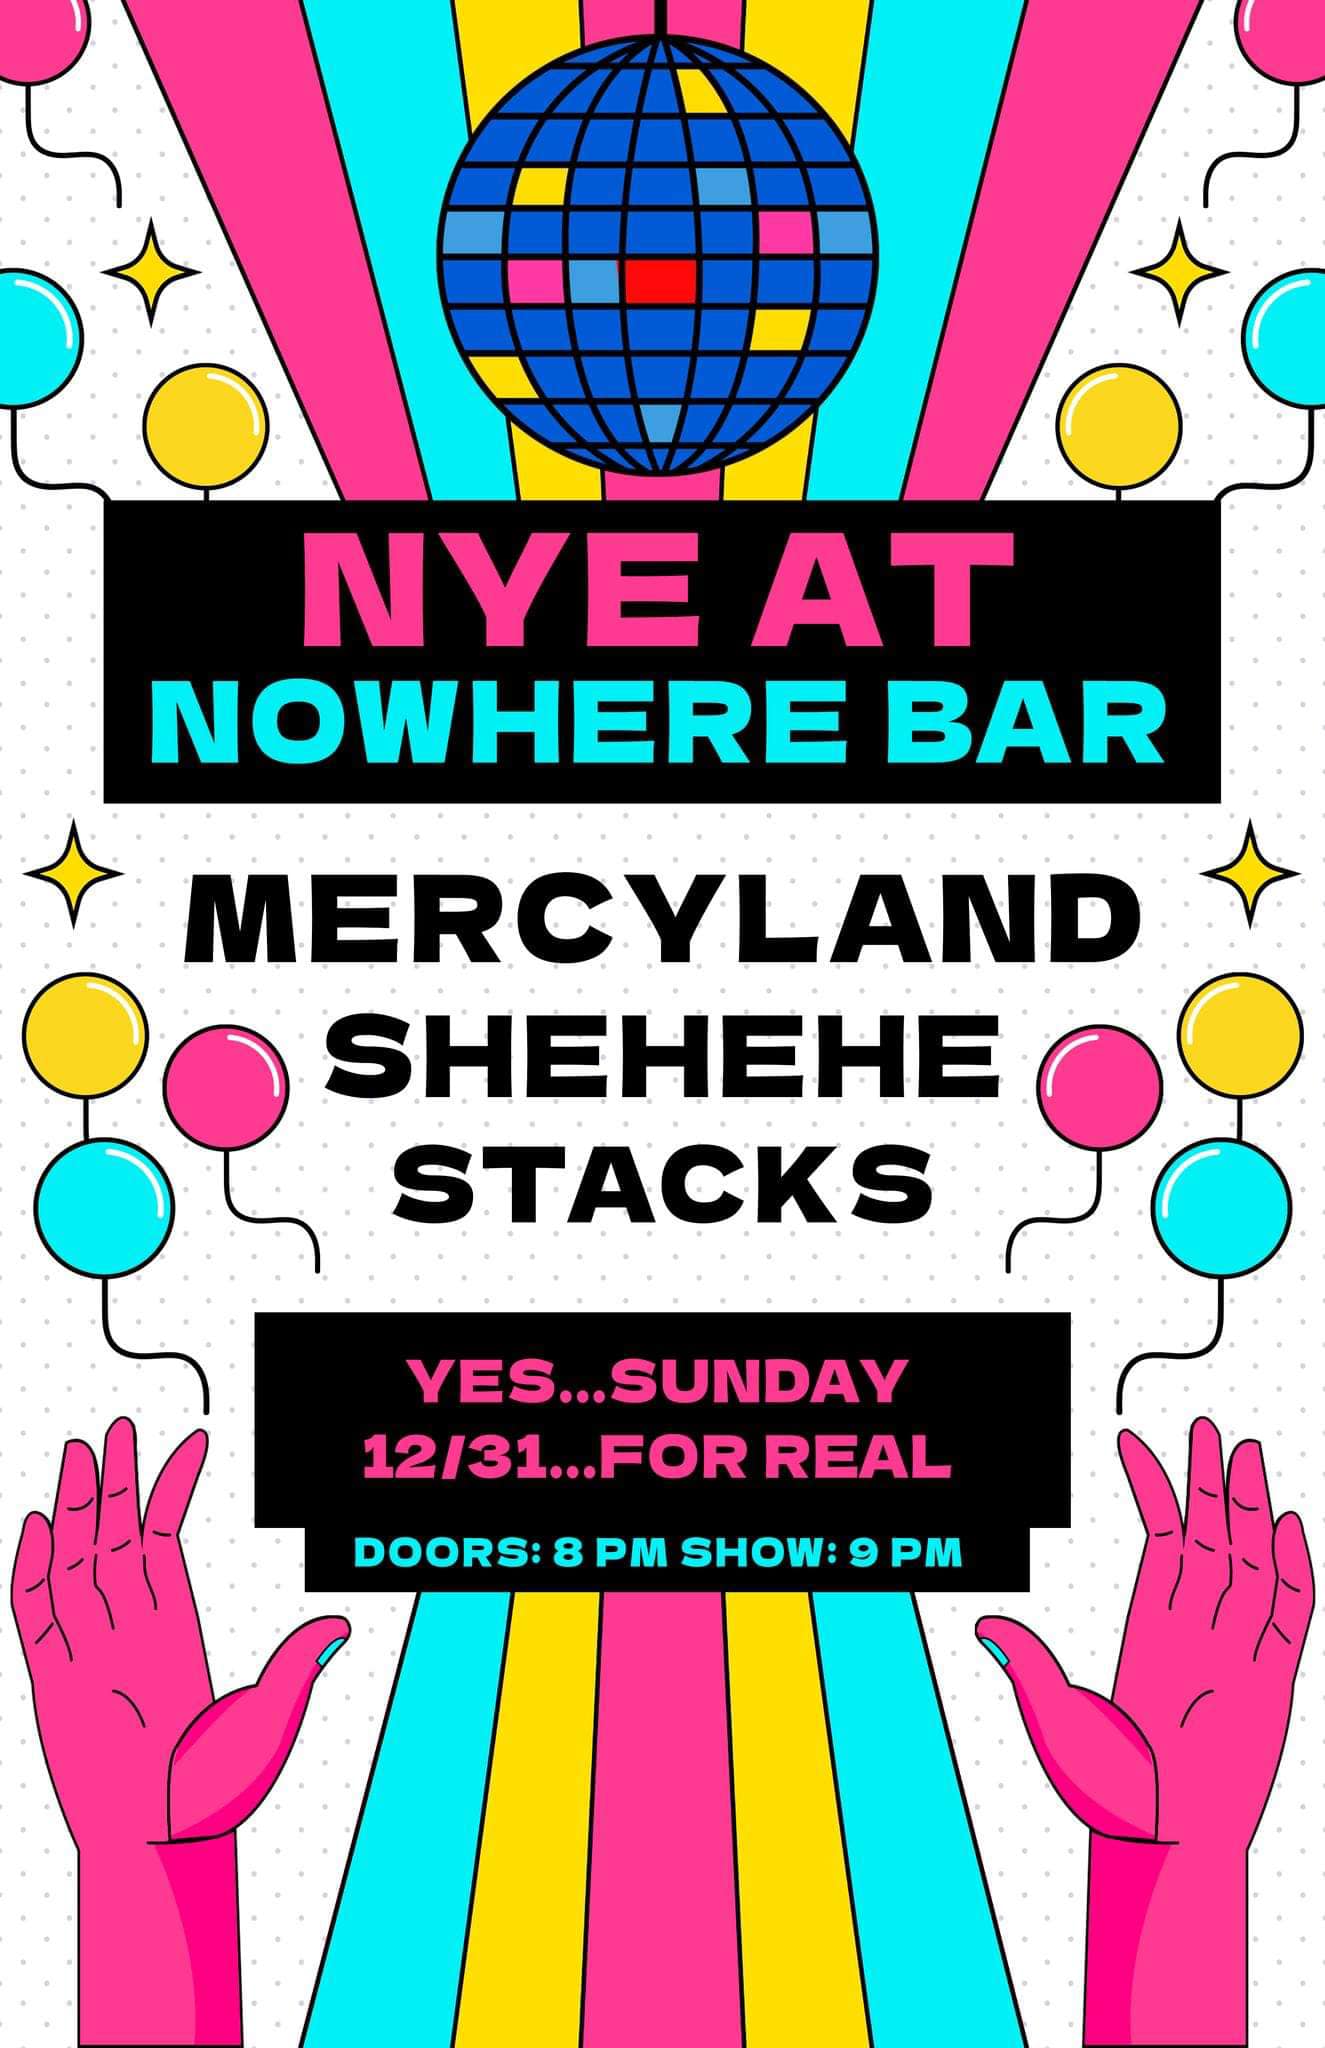 Stacks open for Mercyland and Shehehe in Athens New Year's Eve!